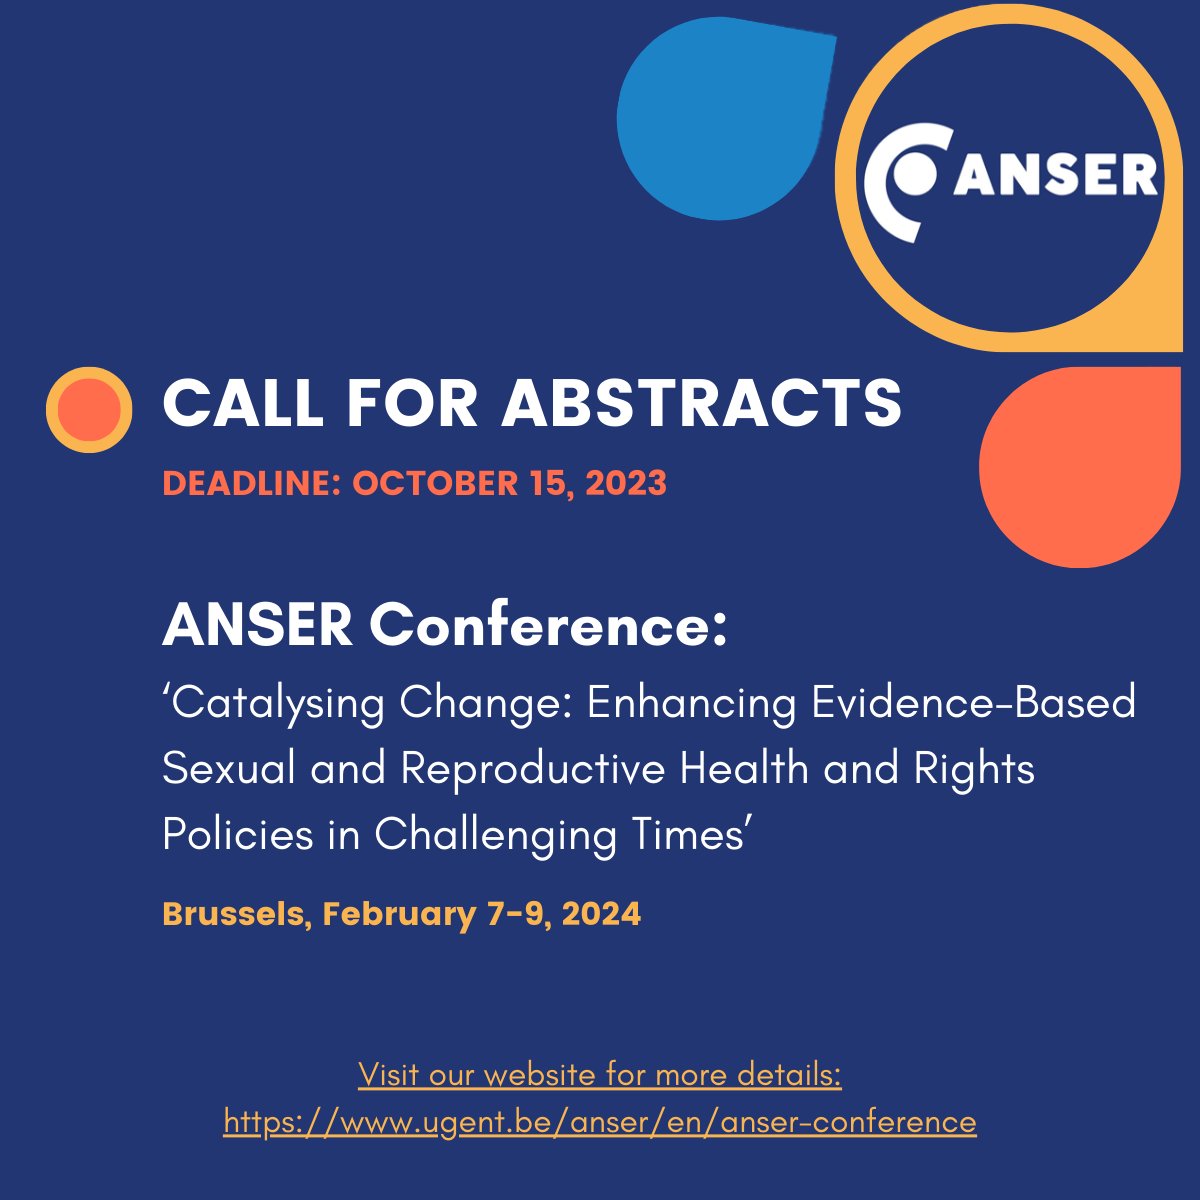 Call for Abstracts for the upcoming ANSER conference on 'Catalysing Change: Enhancing Evidence-Based Sexual and Reproductive Health and Rights Policies in Challenging Times' is now open! For more details, visit our website: ugent.be/anser/en/anser…. #SRHR #Evidence2Policy